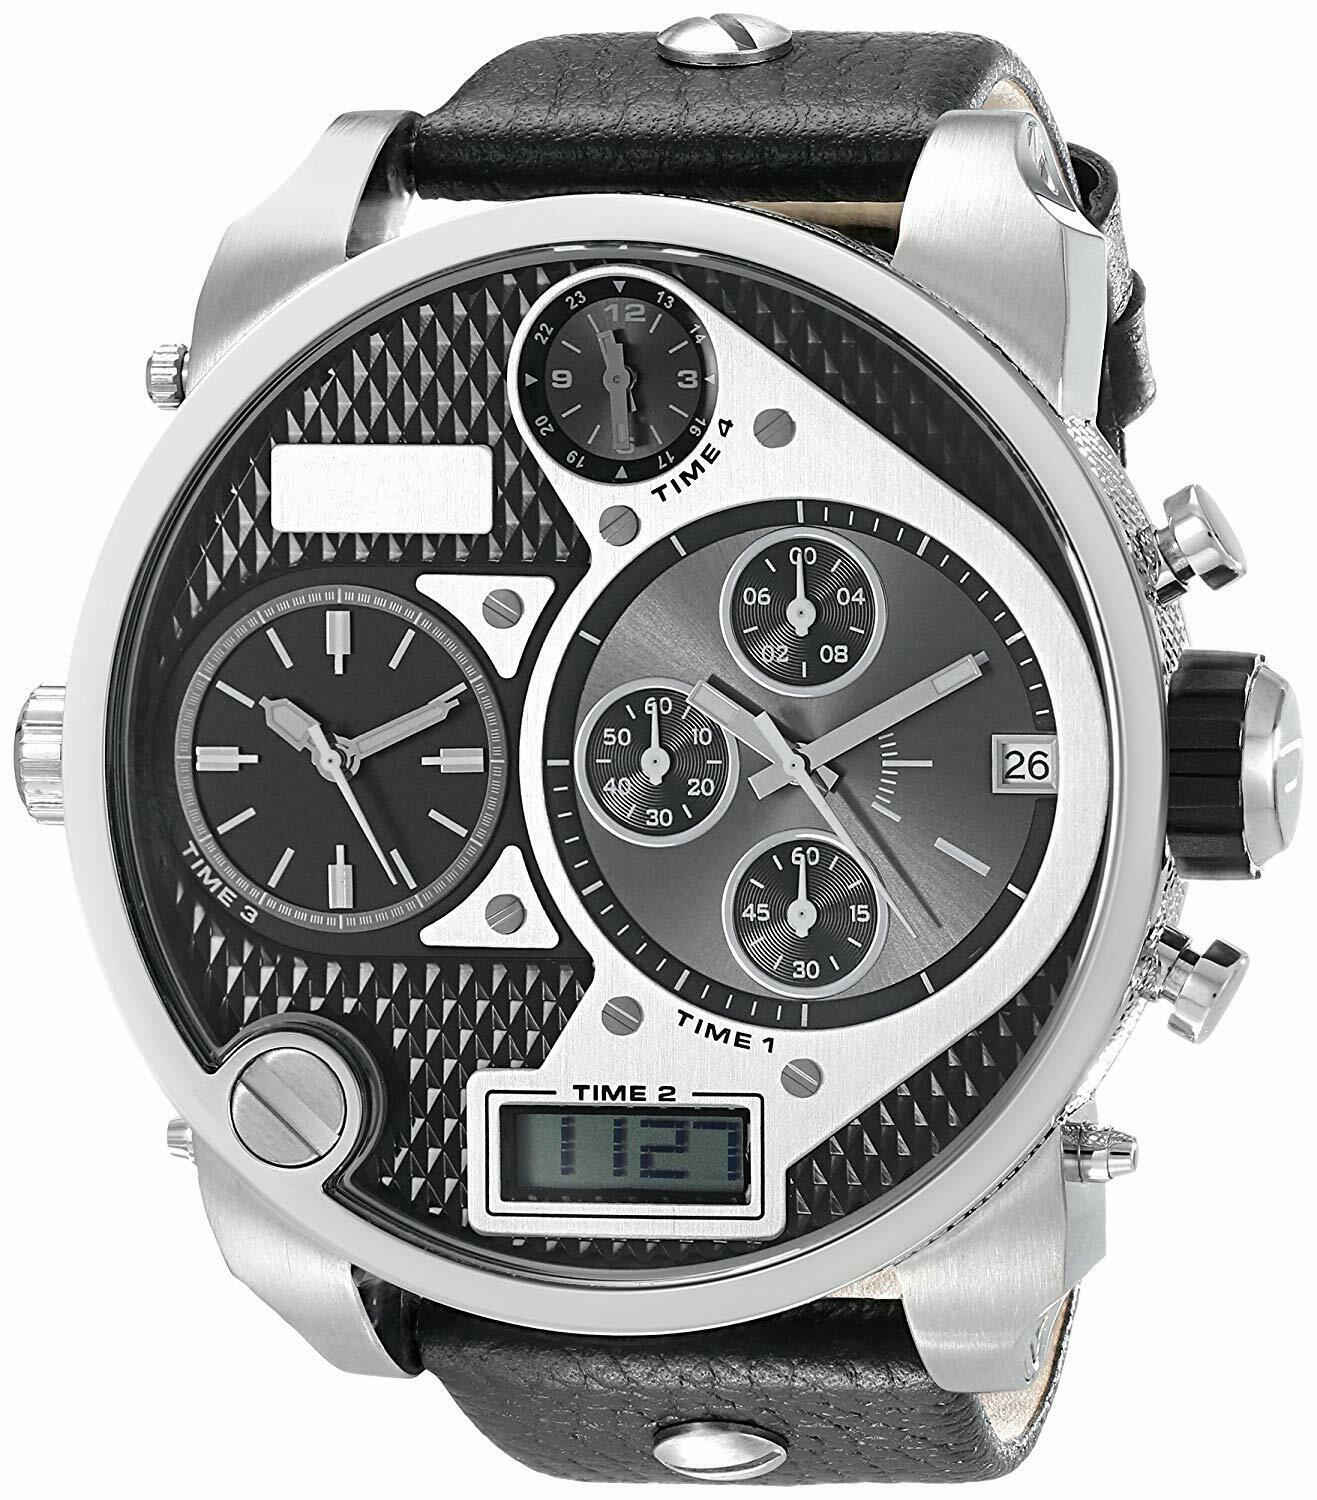 

Hot sell DZ7125+7127+7221+7261+7279 Men's Chronograph 4 times zones black dial date black leather/stell men's watch, Slivery;brown